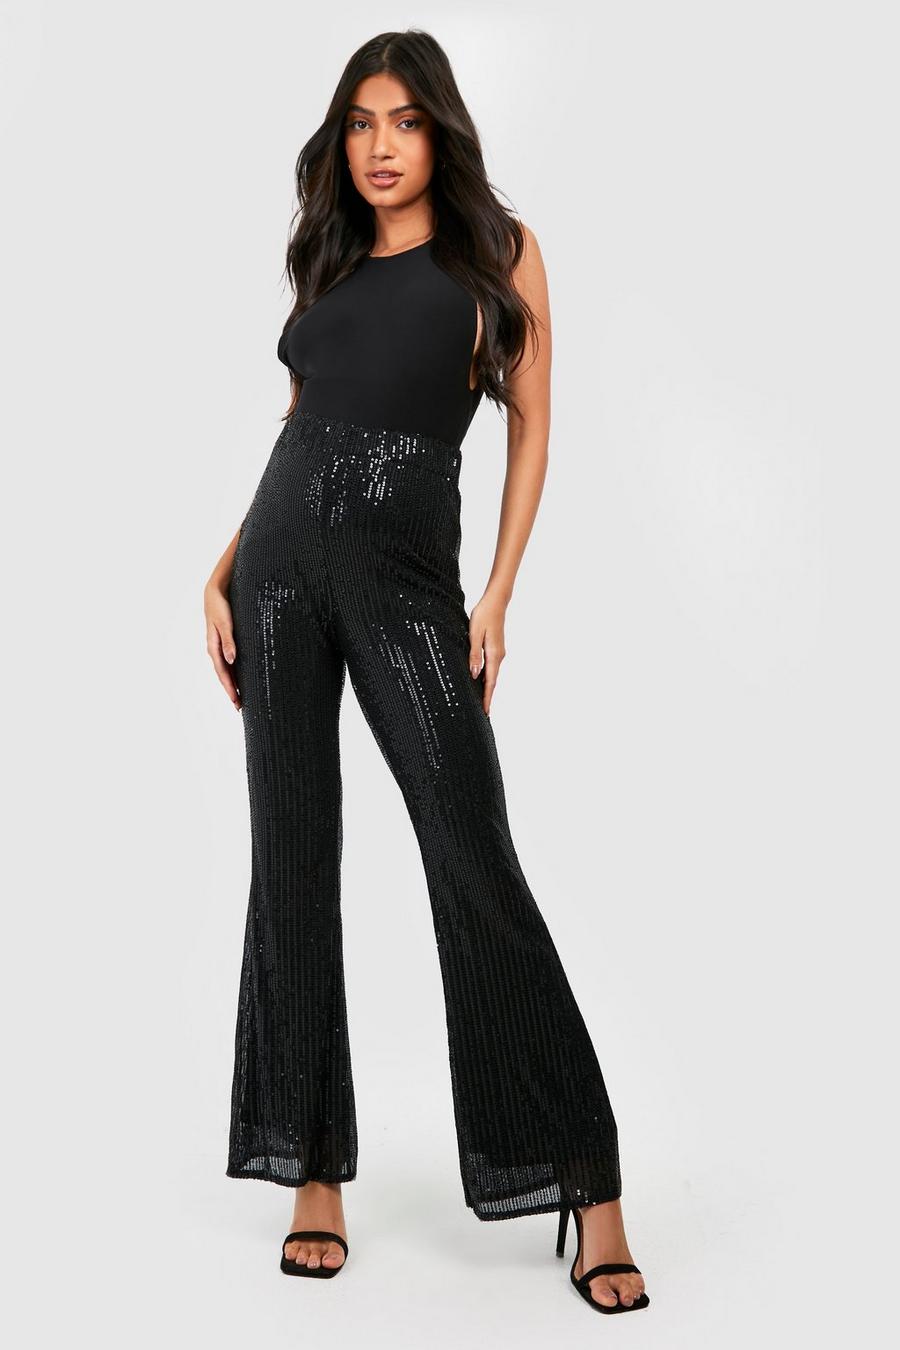 Black Maternity Sequin Stretch Flare Pants